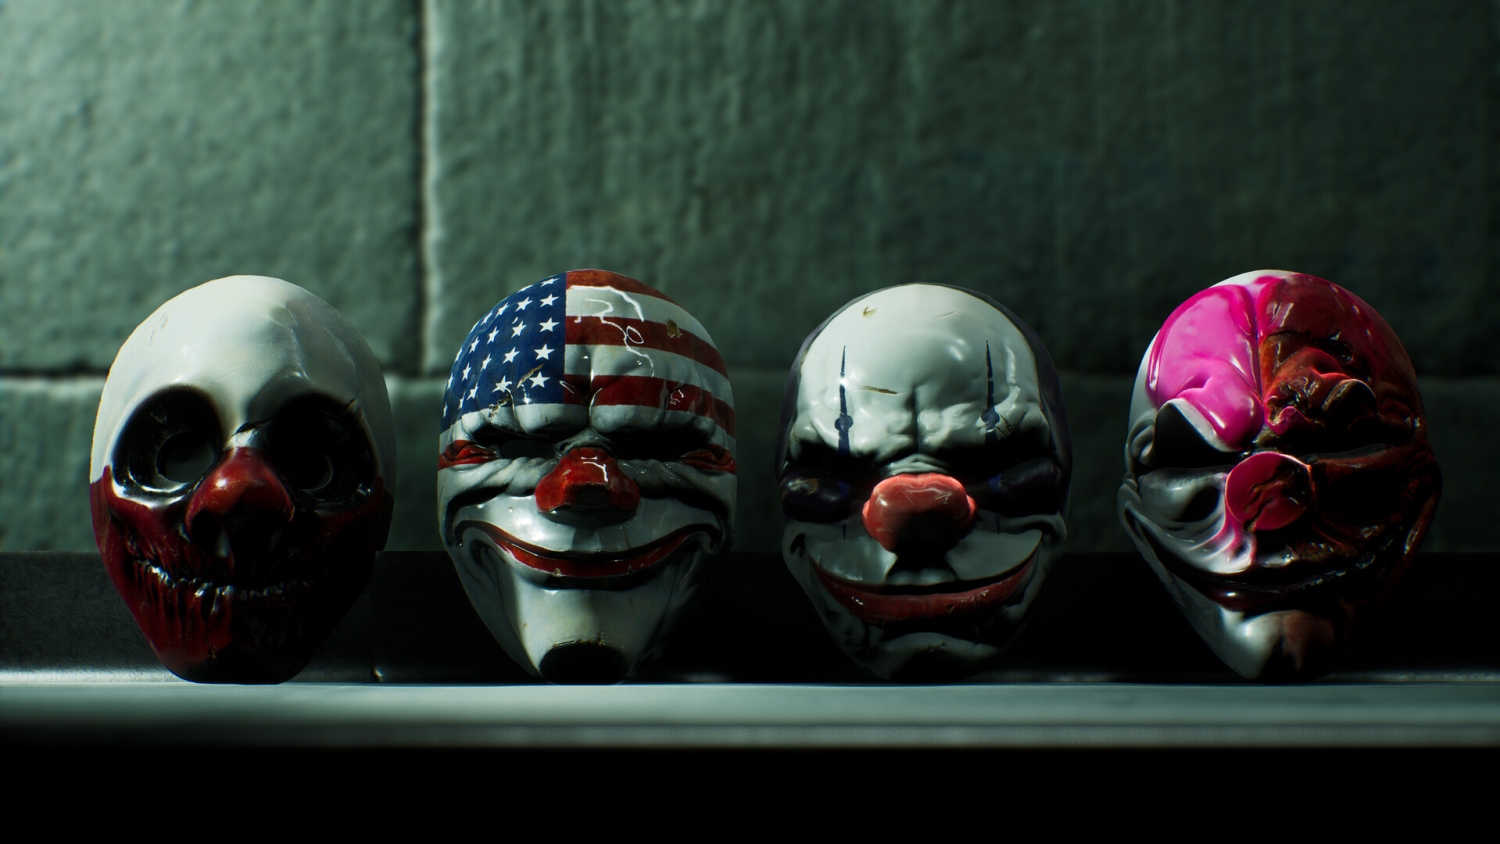 Online-only Payday 3 unplayable at launch, faces controversy